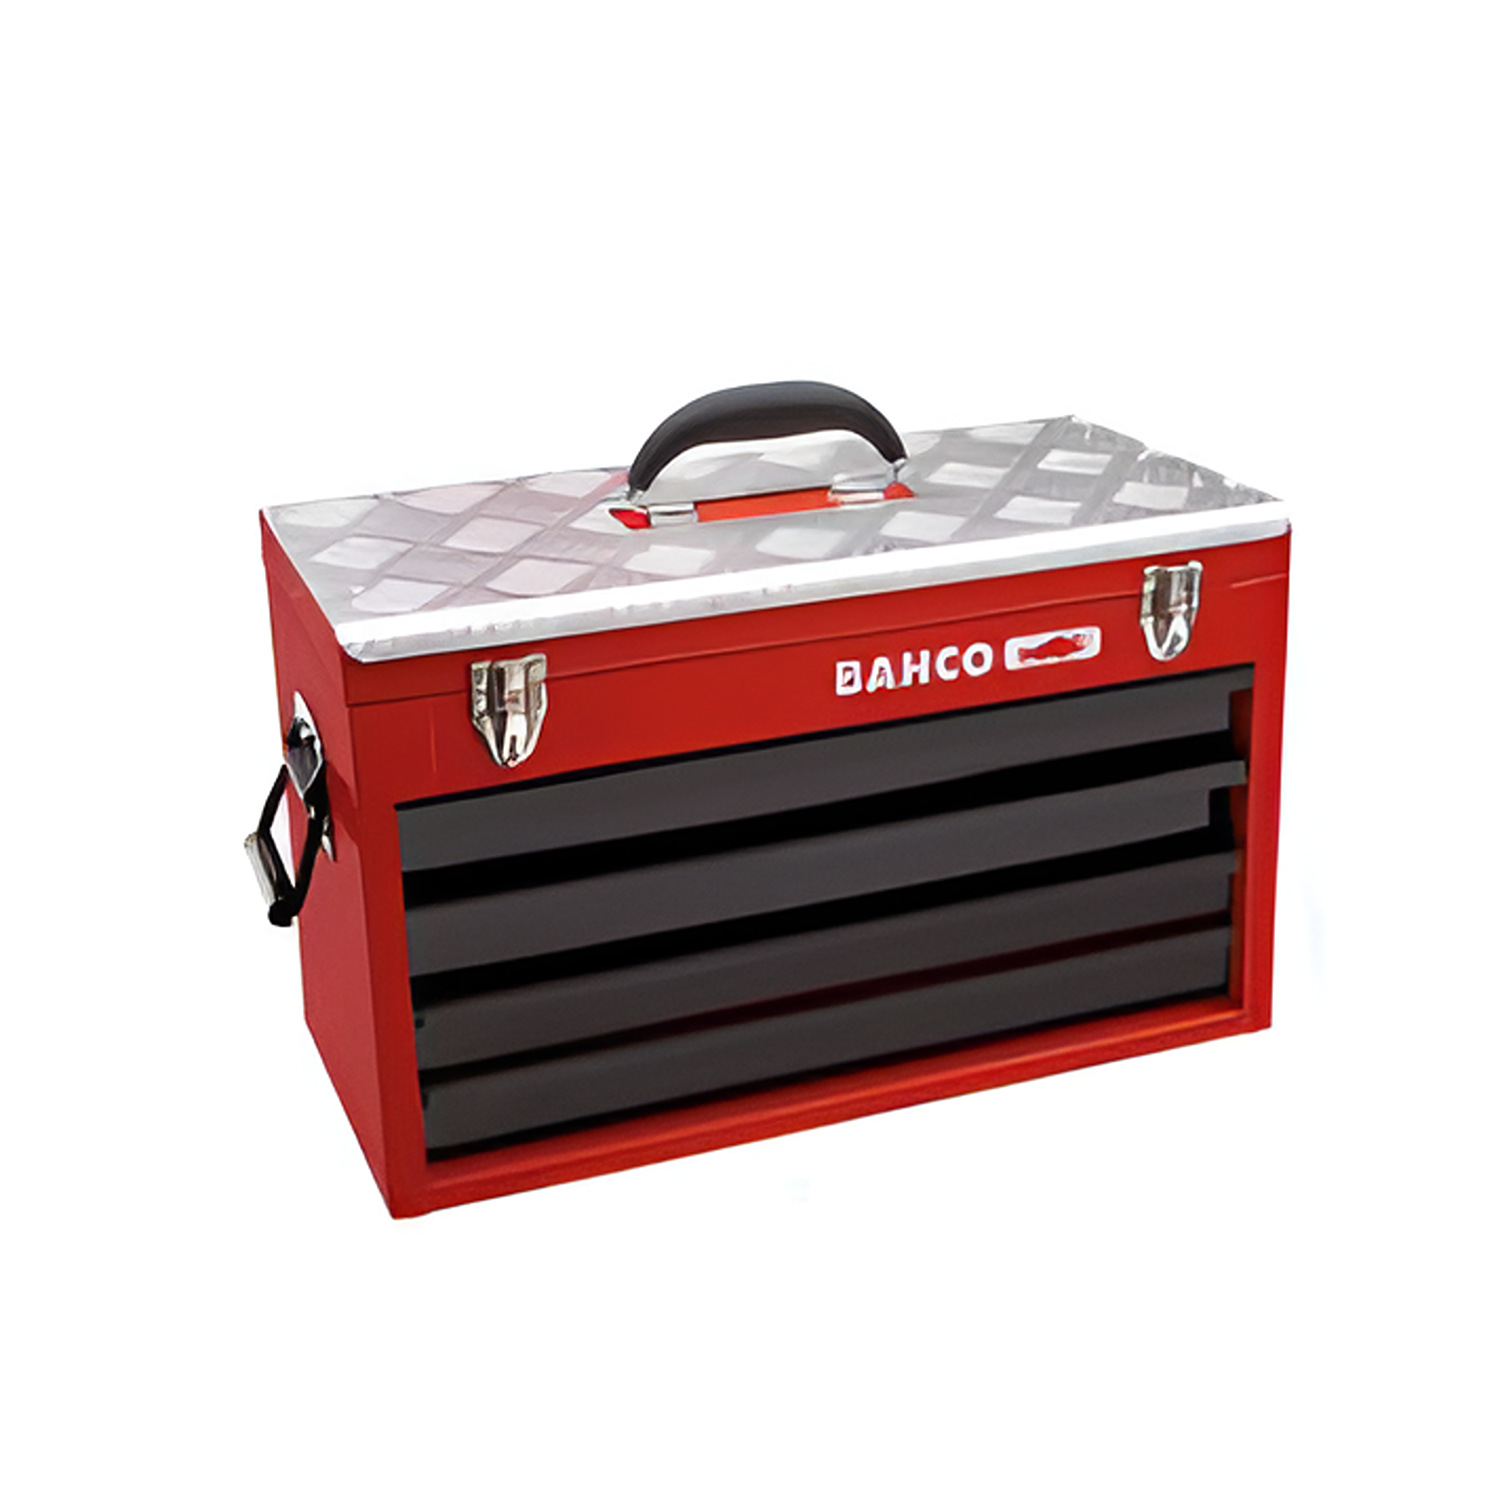 BAHCO 1483KHD4RB Heavy Duty Metallic Tool Boxes with 4 Drawers - Premium Metallic Tool Boxes from BAHCO - Shop now at Yew Aik.